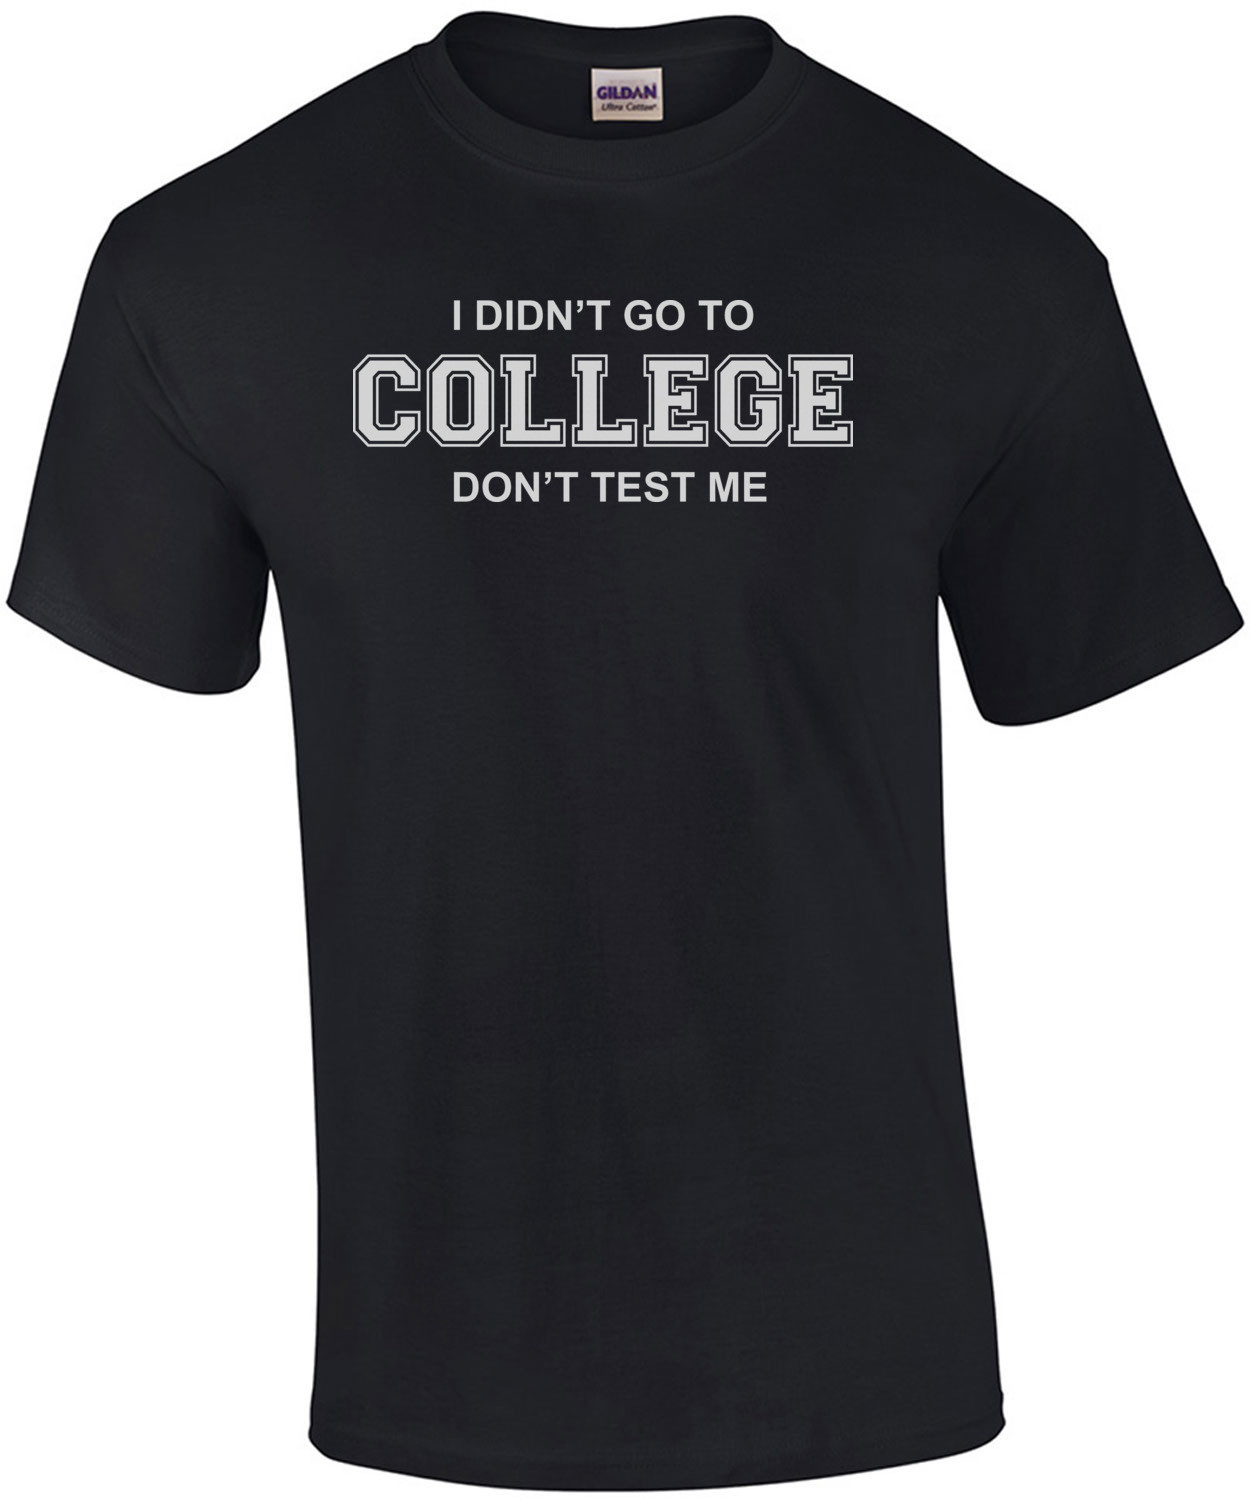 I Didn't Go To College Don't Test Me T-shirt